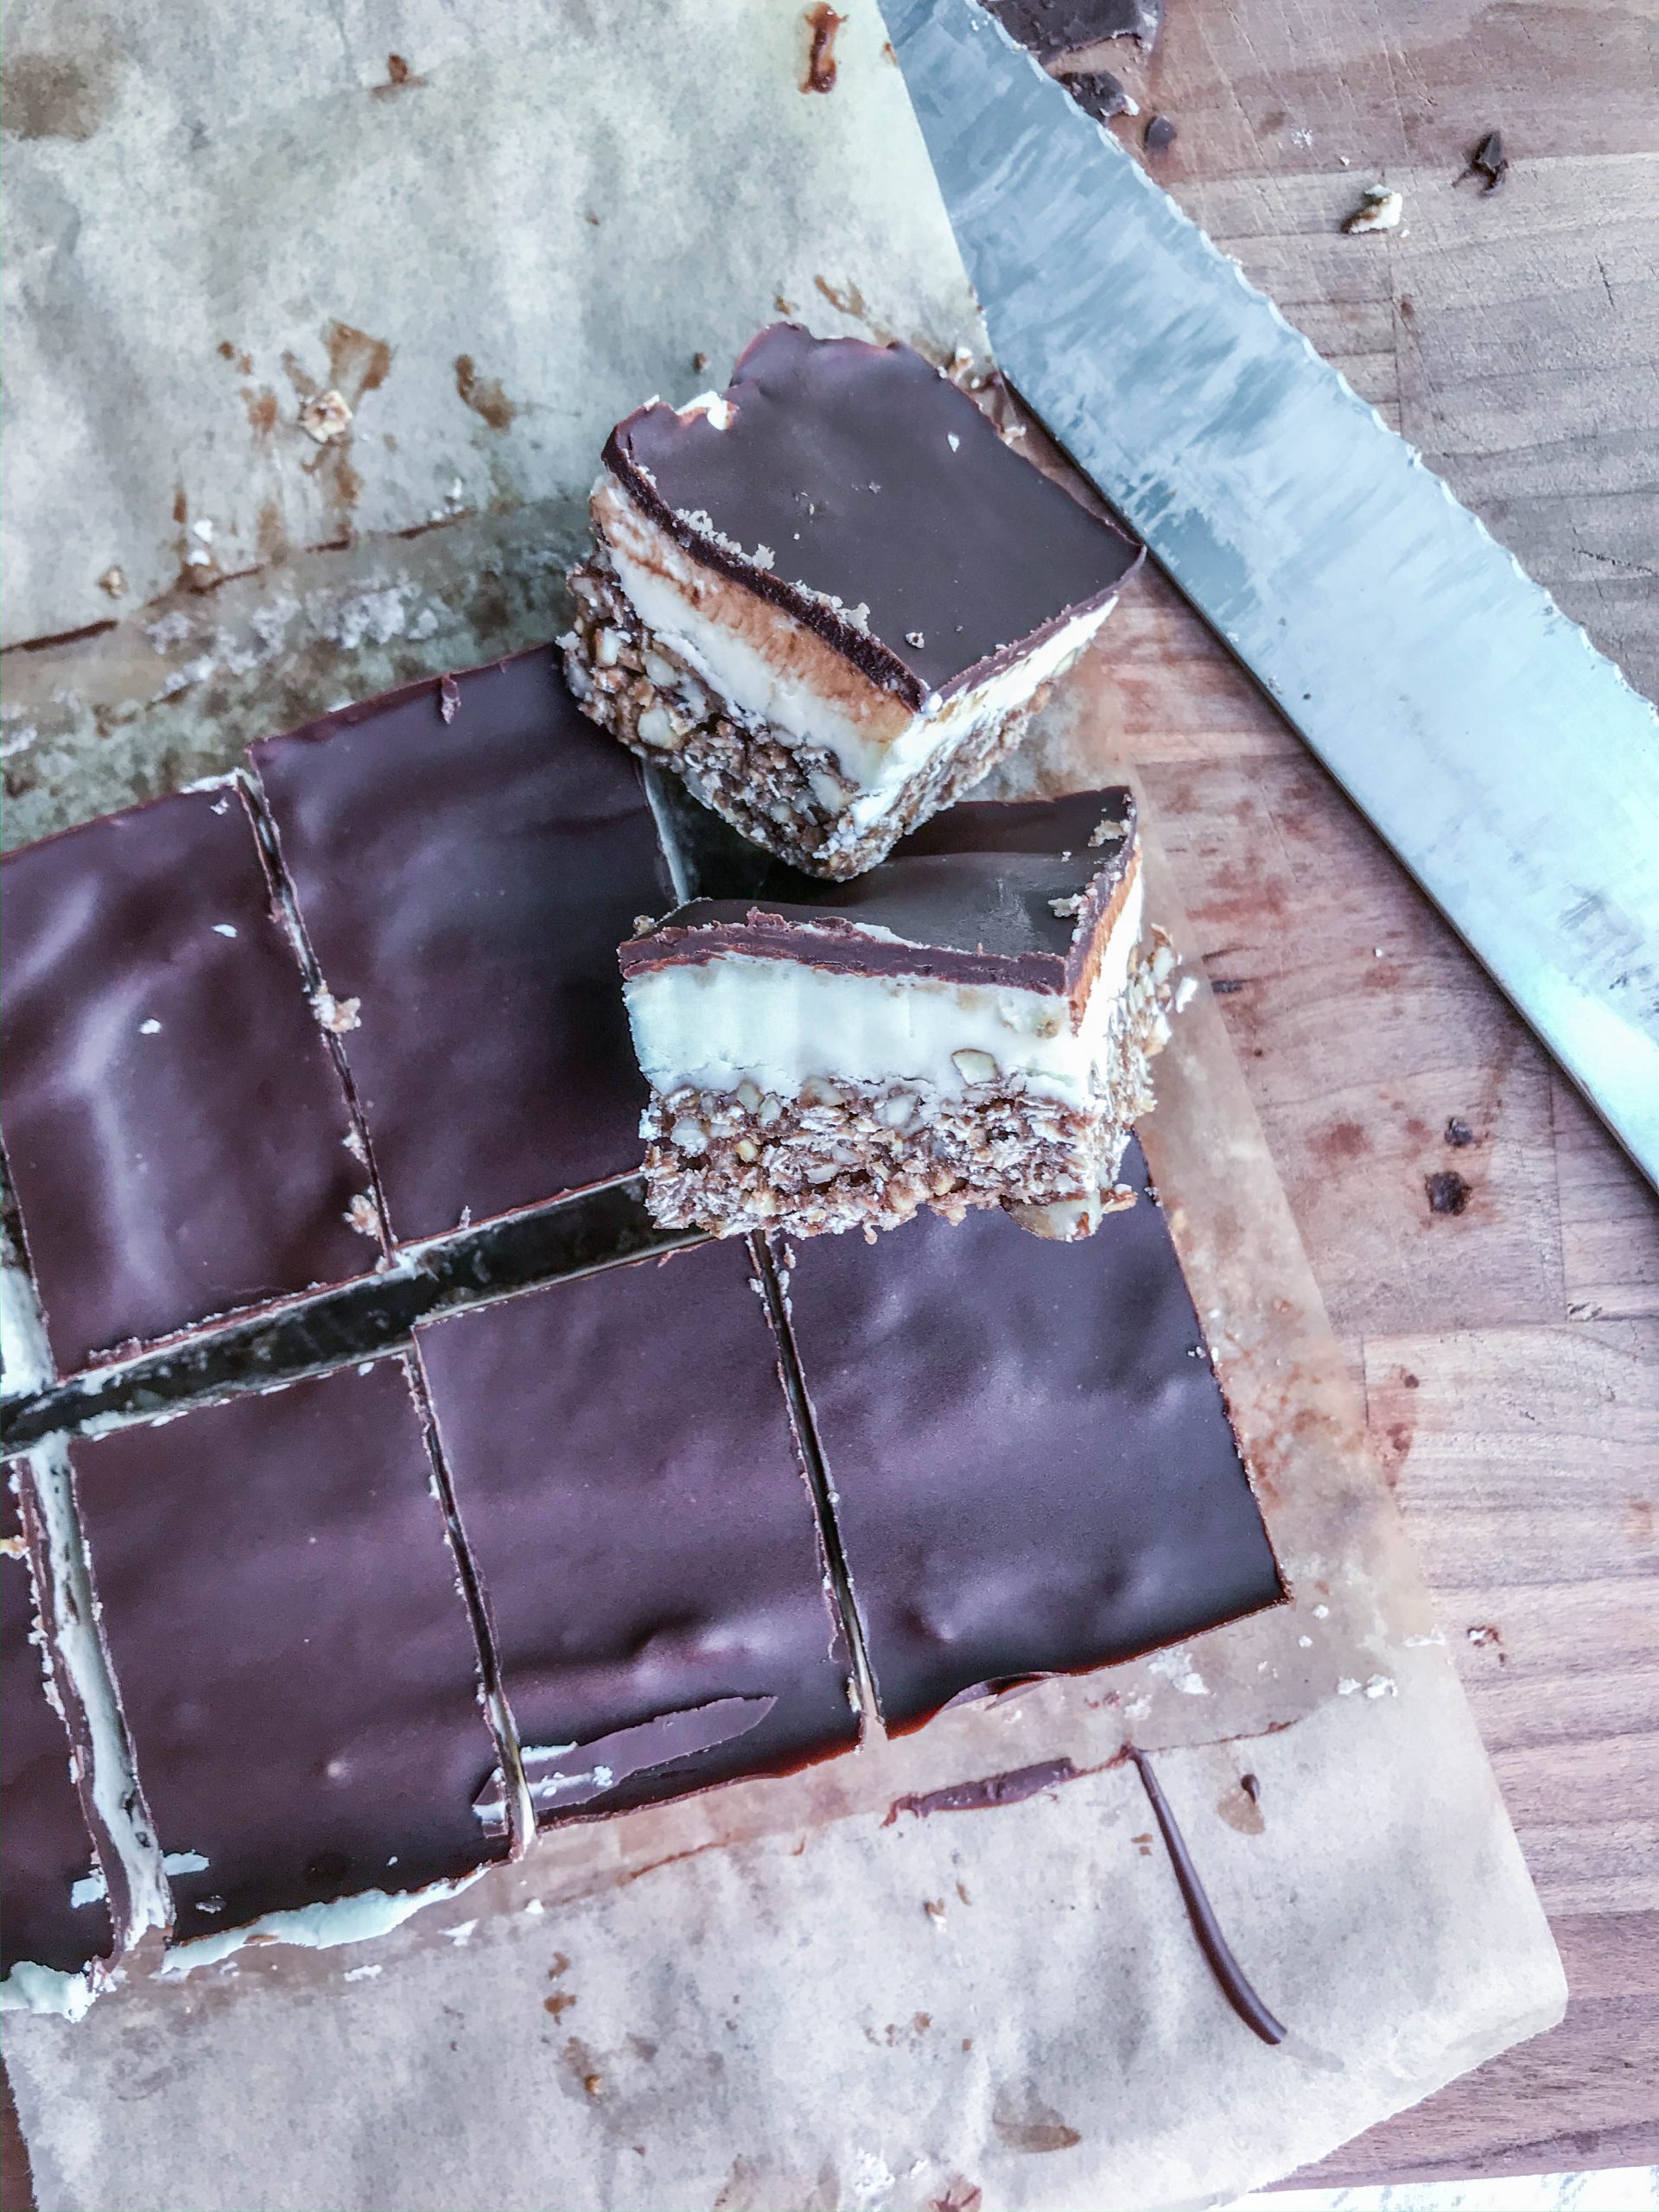 Nanaimo bars are a really fun summer dessert. They are easy to customize and come up with different flavors. Plus they taste amazing! They are pretty rich so you can cut the bars smaller to have more servings. 